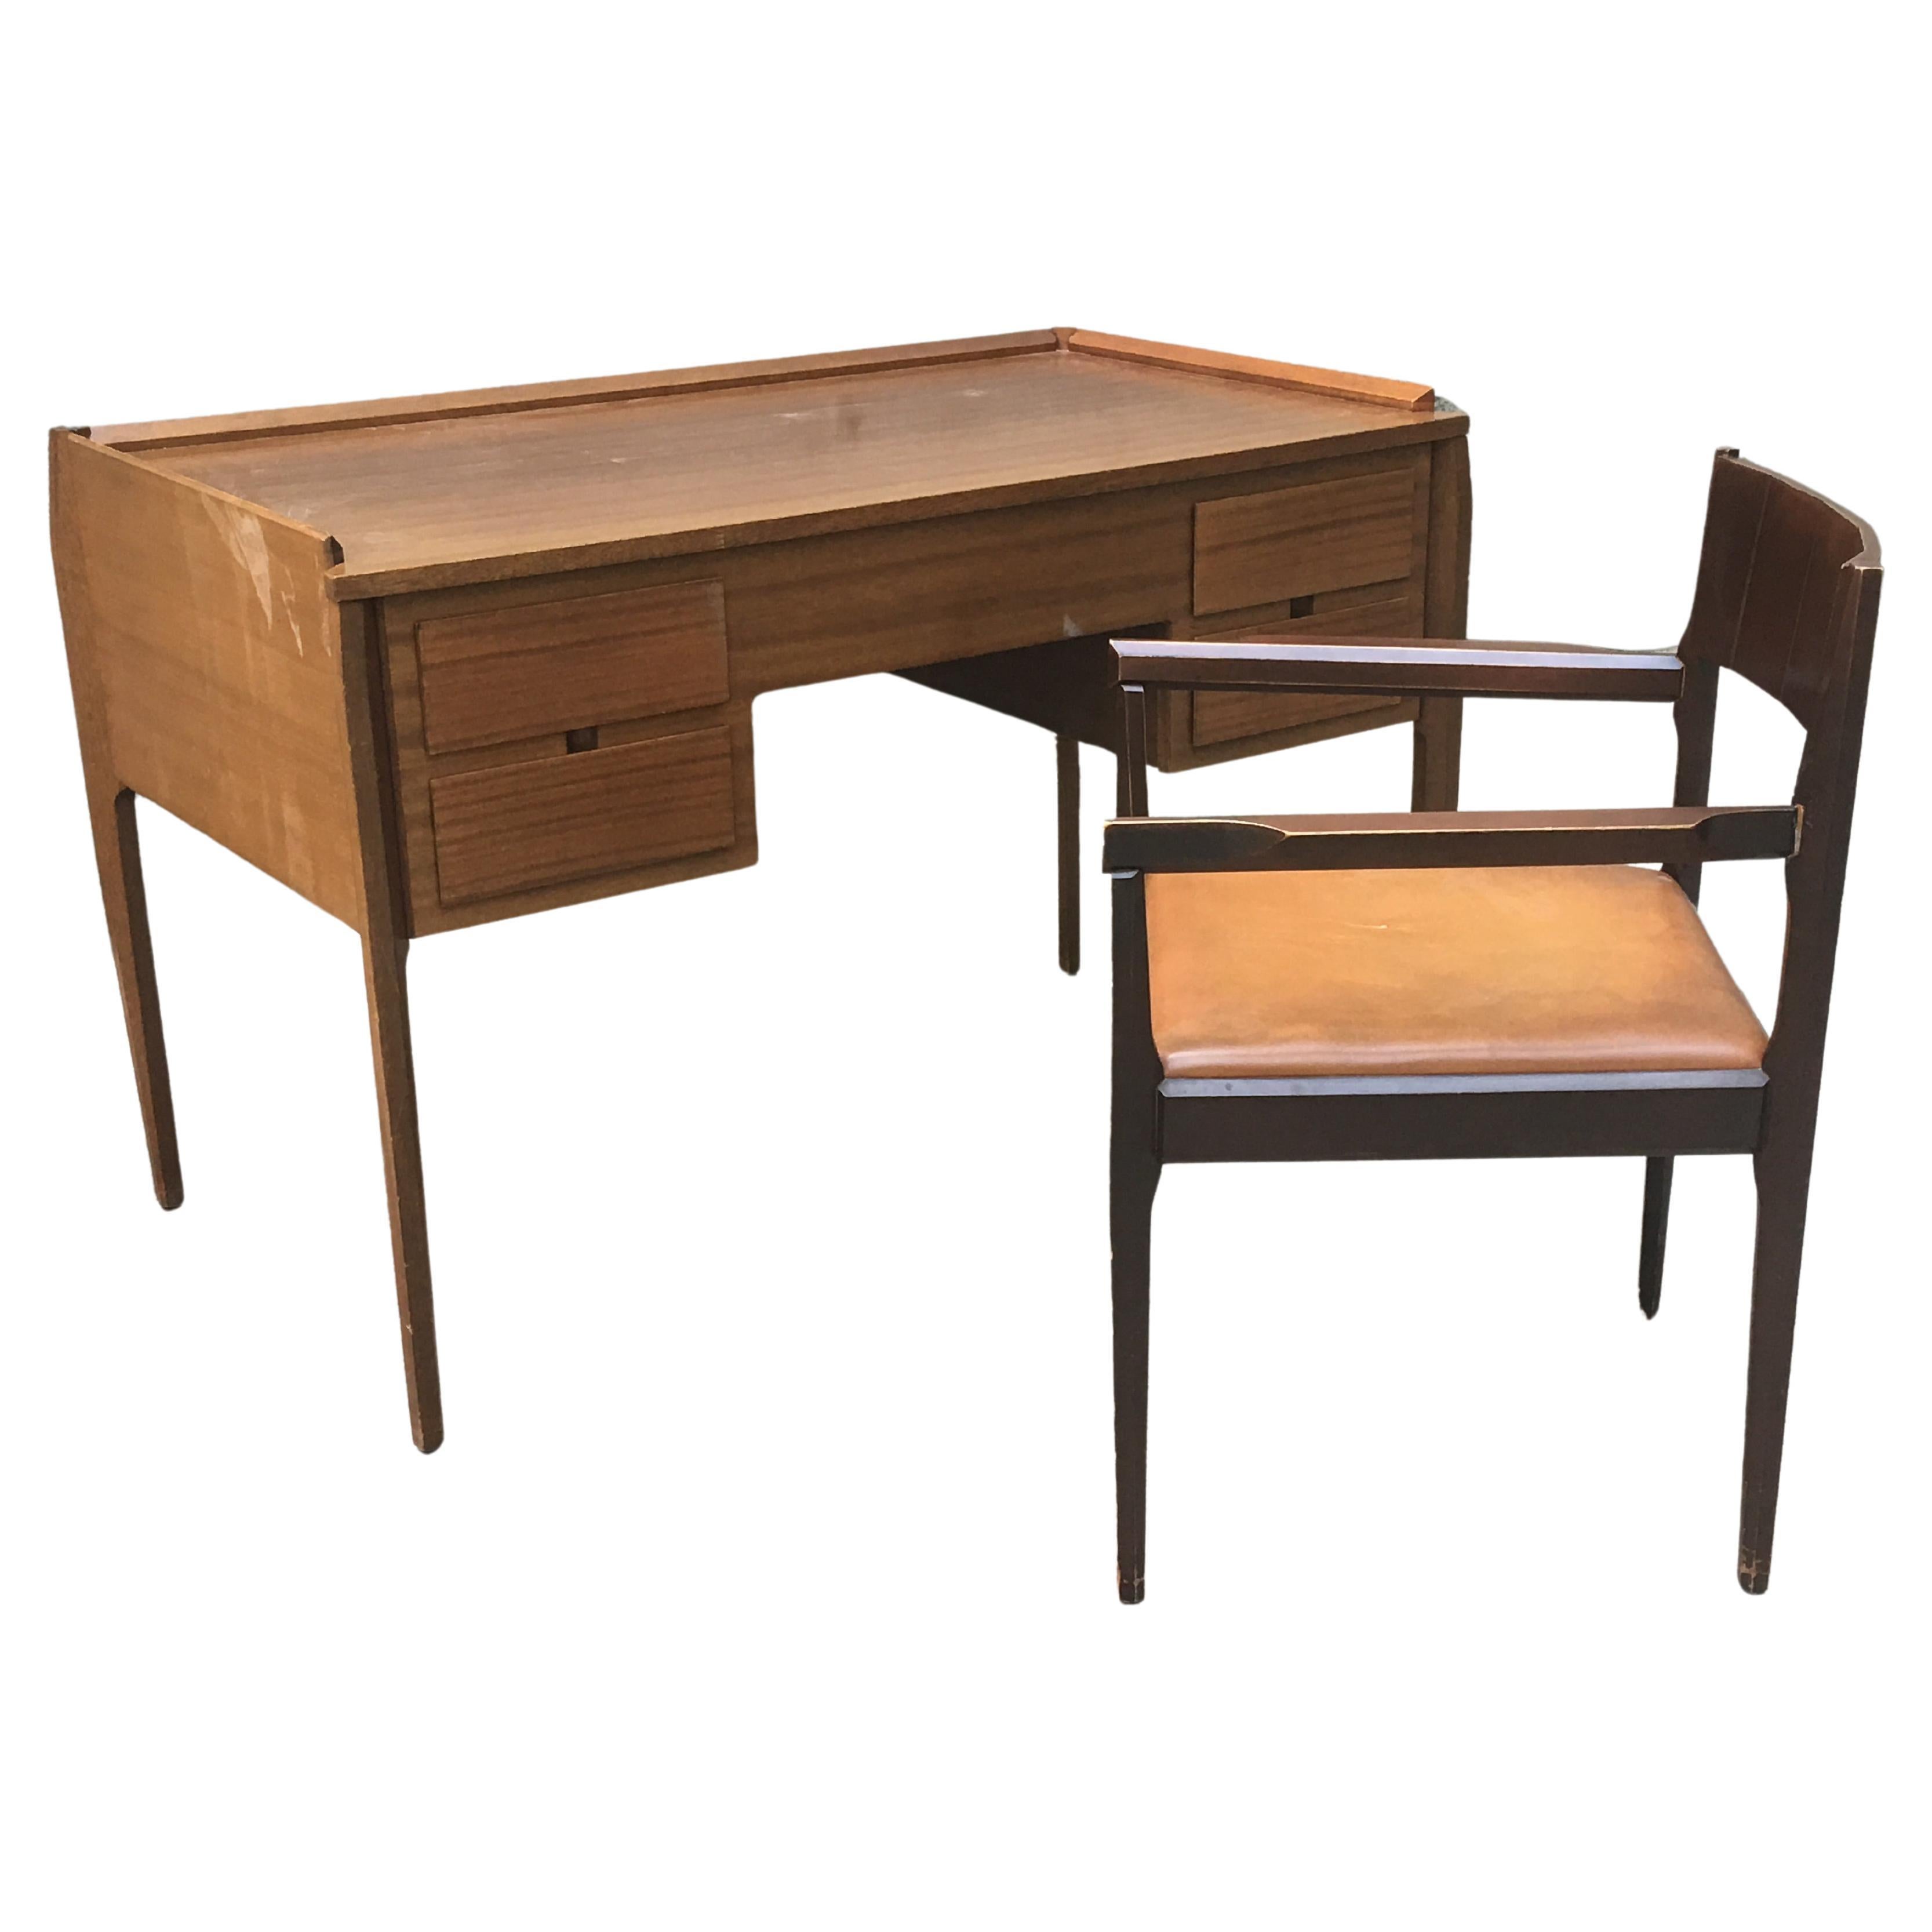 Small Italian Desk with Matching Chair - 60's - Vittorio Dassi -  Set of 2 For Sale